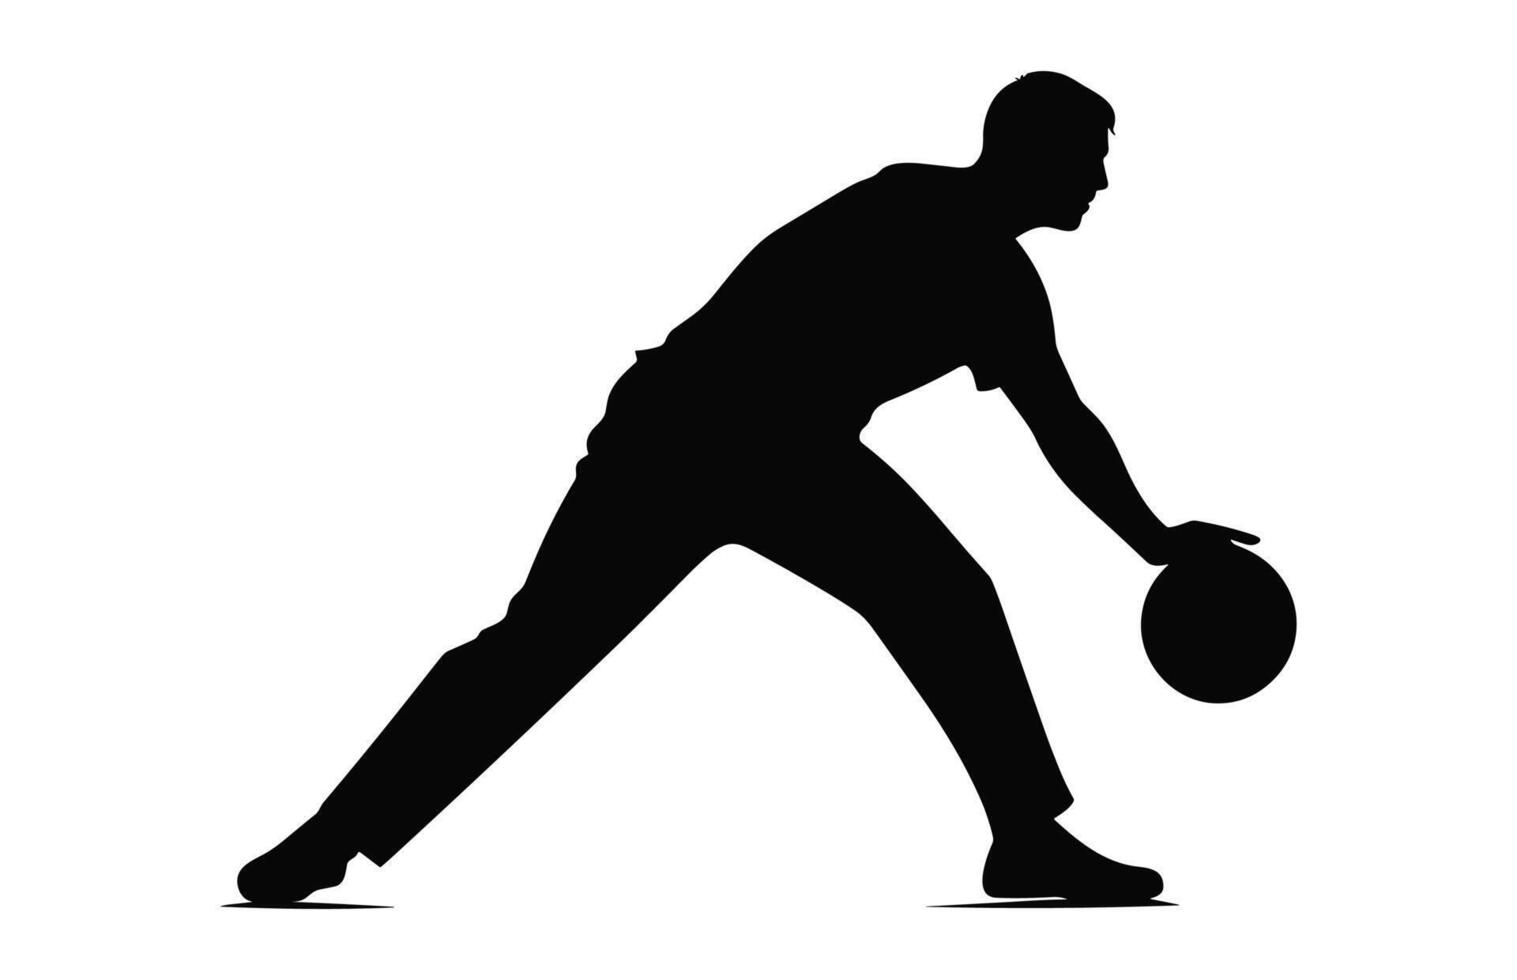 Bowling Player Silhouette Vector, A Male Bowler black Clipart vector